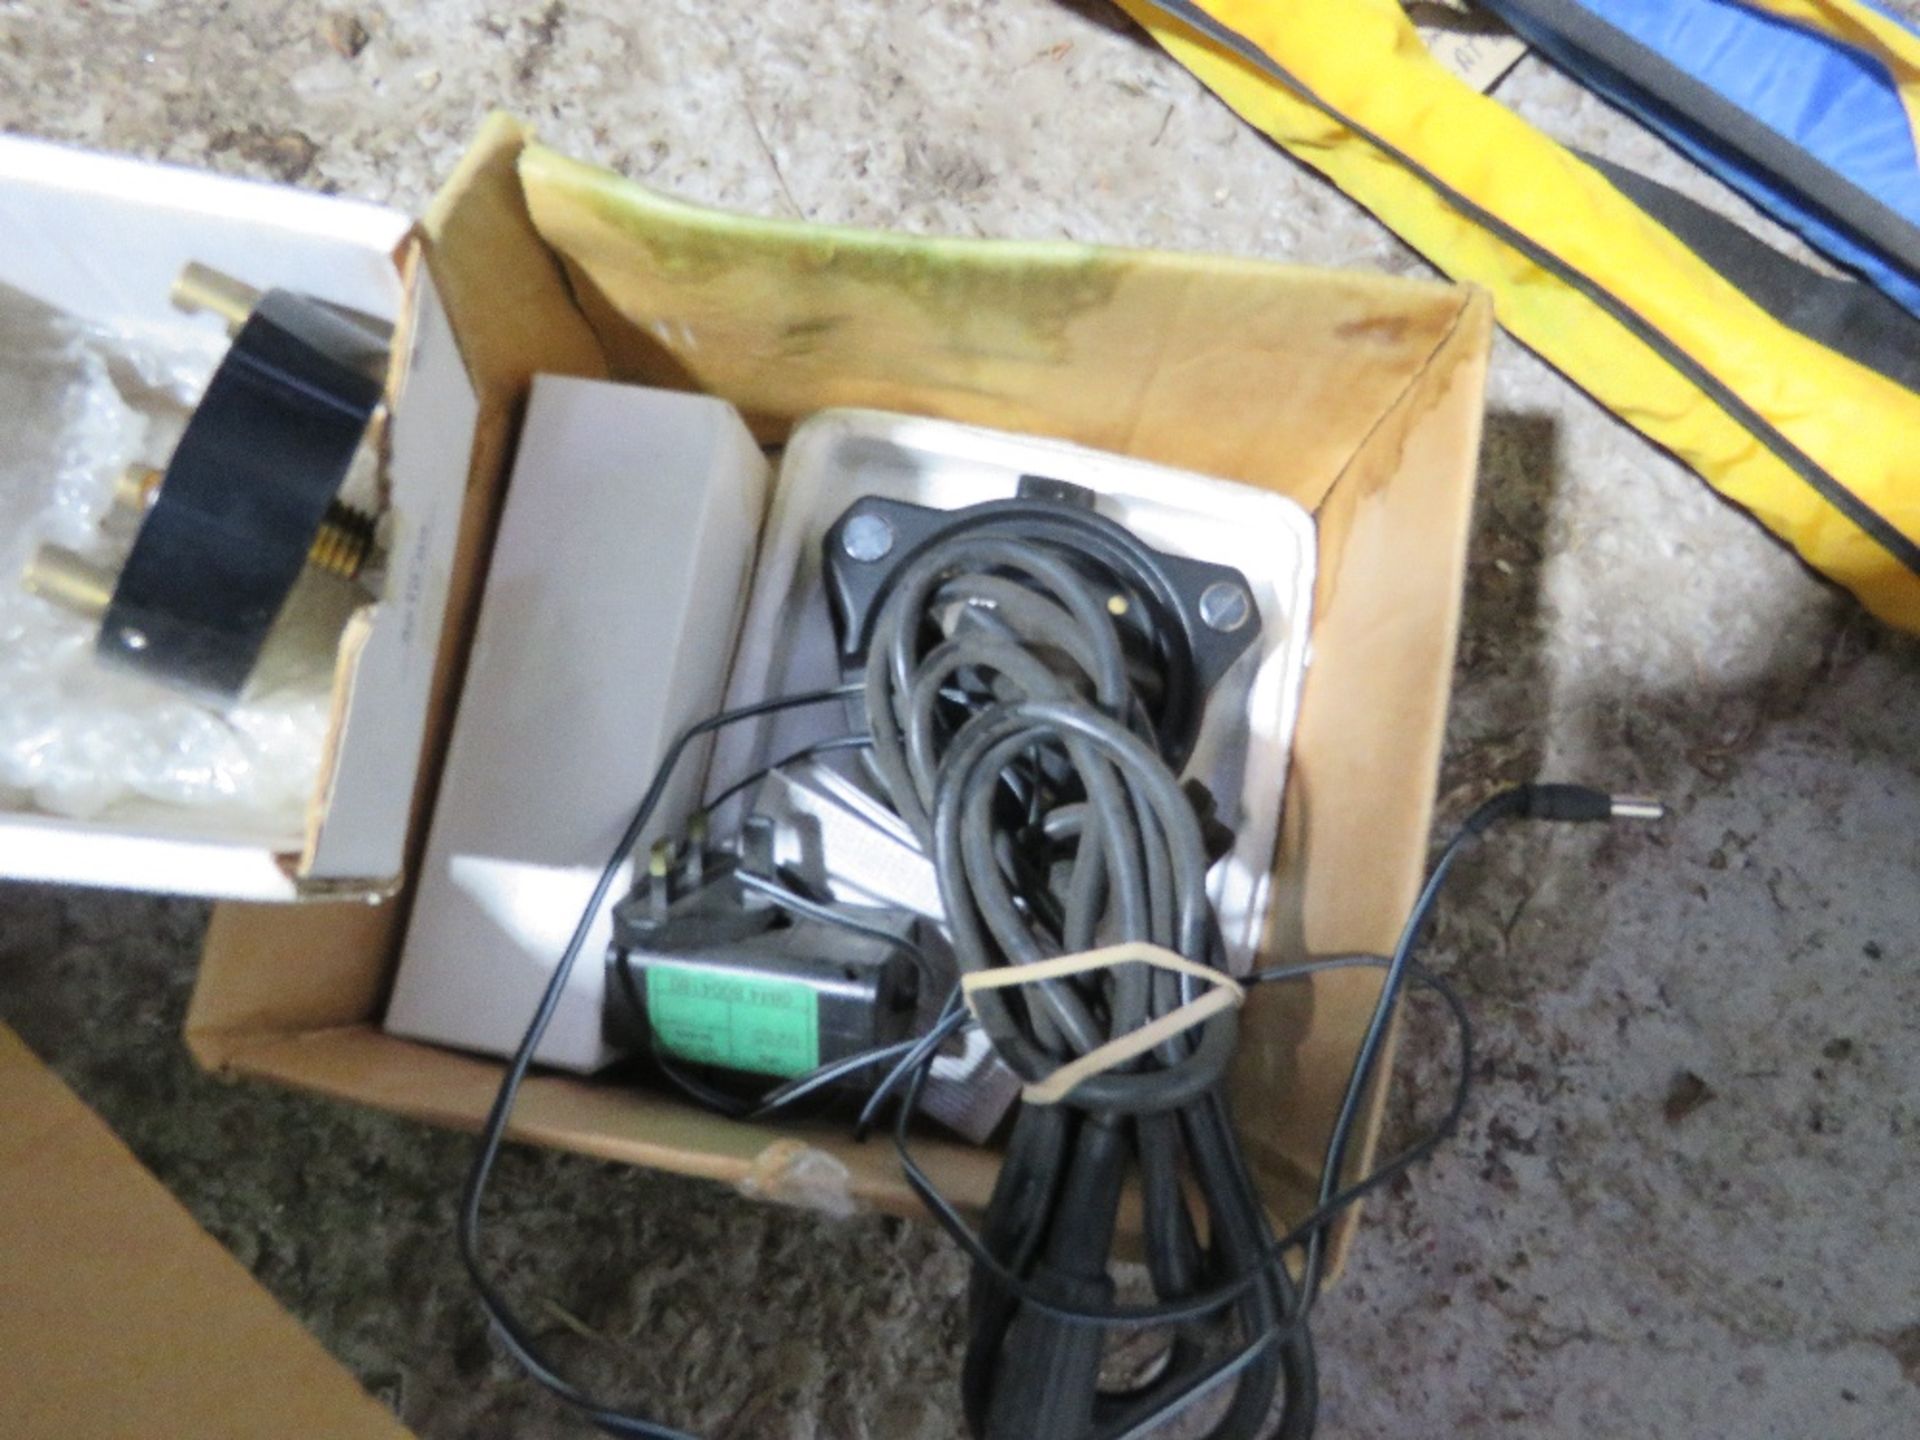 2 X BOXES OF ASSORTED SURVEY RELATED EQUIPMENT. DIRECT FROM LOCAL COMPANY DUE TO A CHANGE OF POLICY. - Image 4 of 4